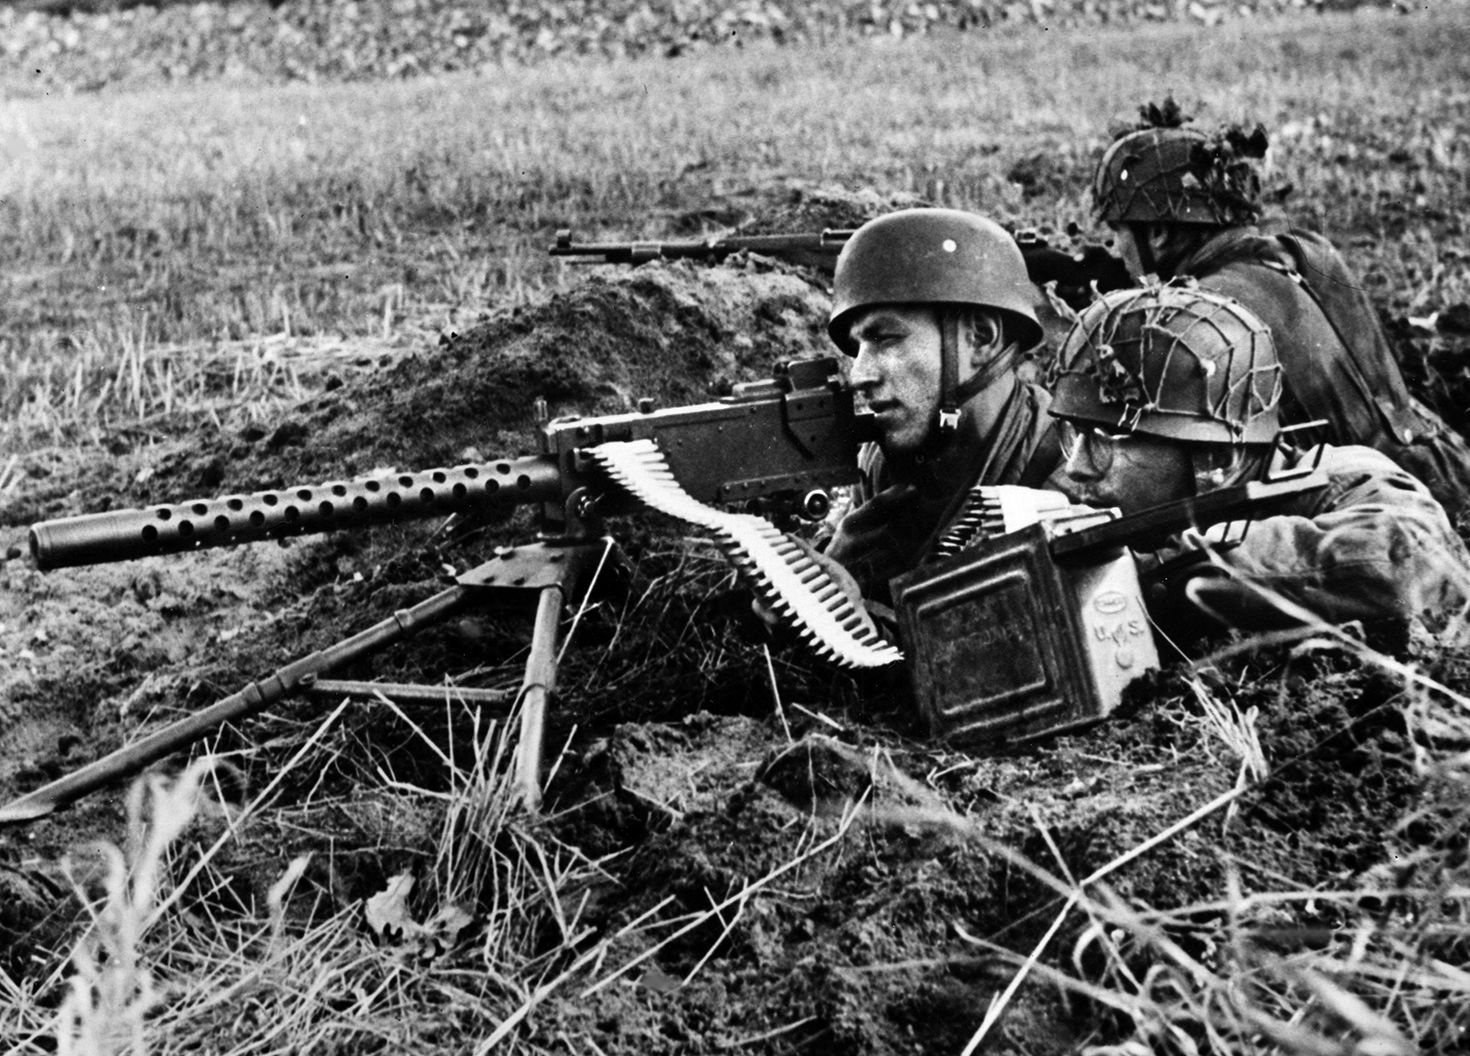 German paratroopers of the 5th Fallschirmjager Division fire a captured American-made Browning M1919 A4 .30-caliber machine gun during the fighting in Operation Market-Garden